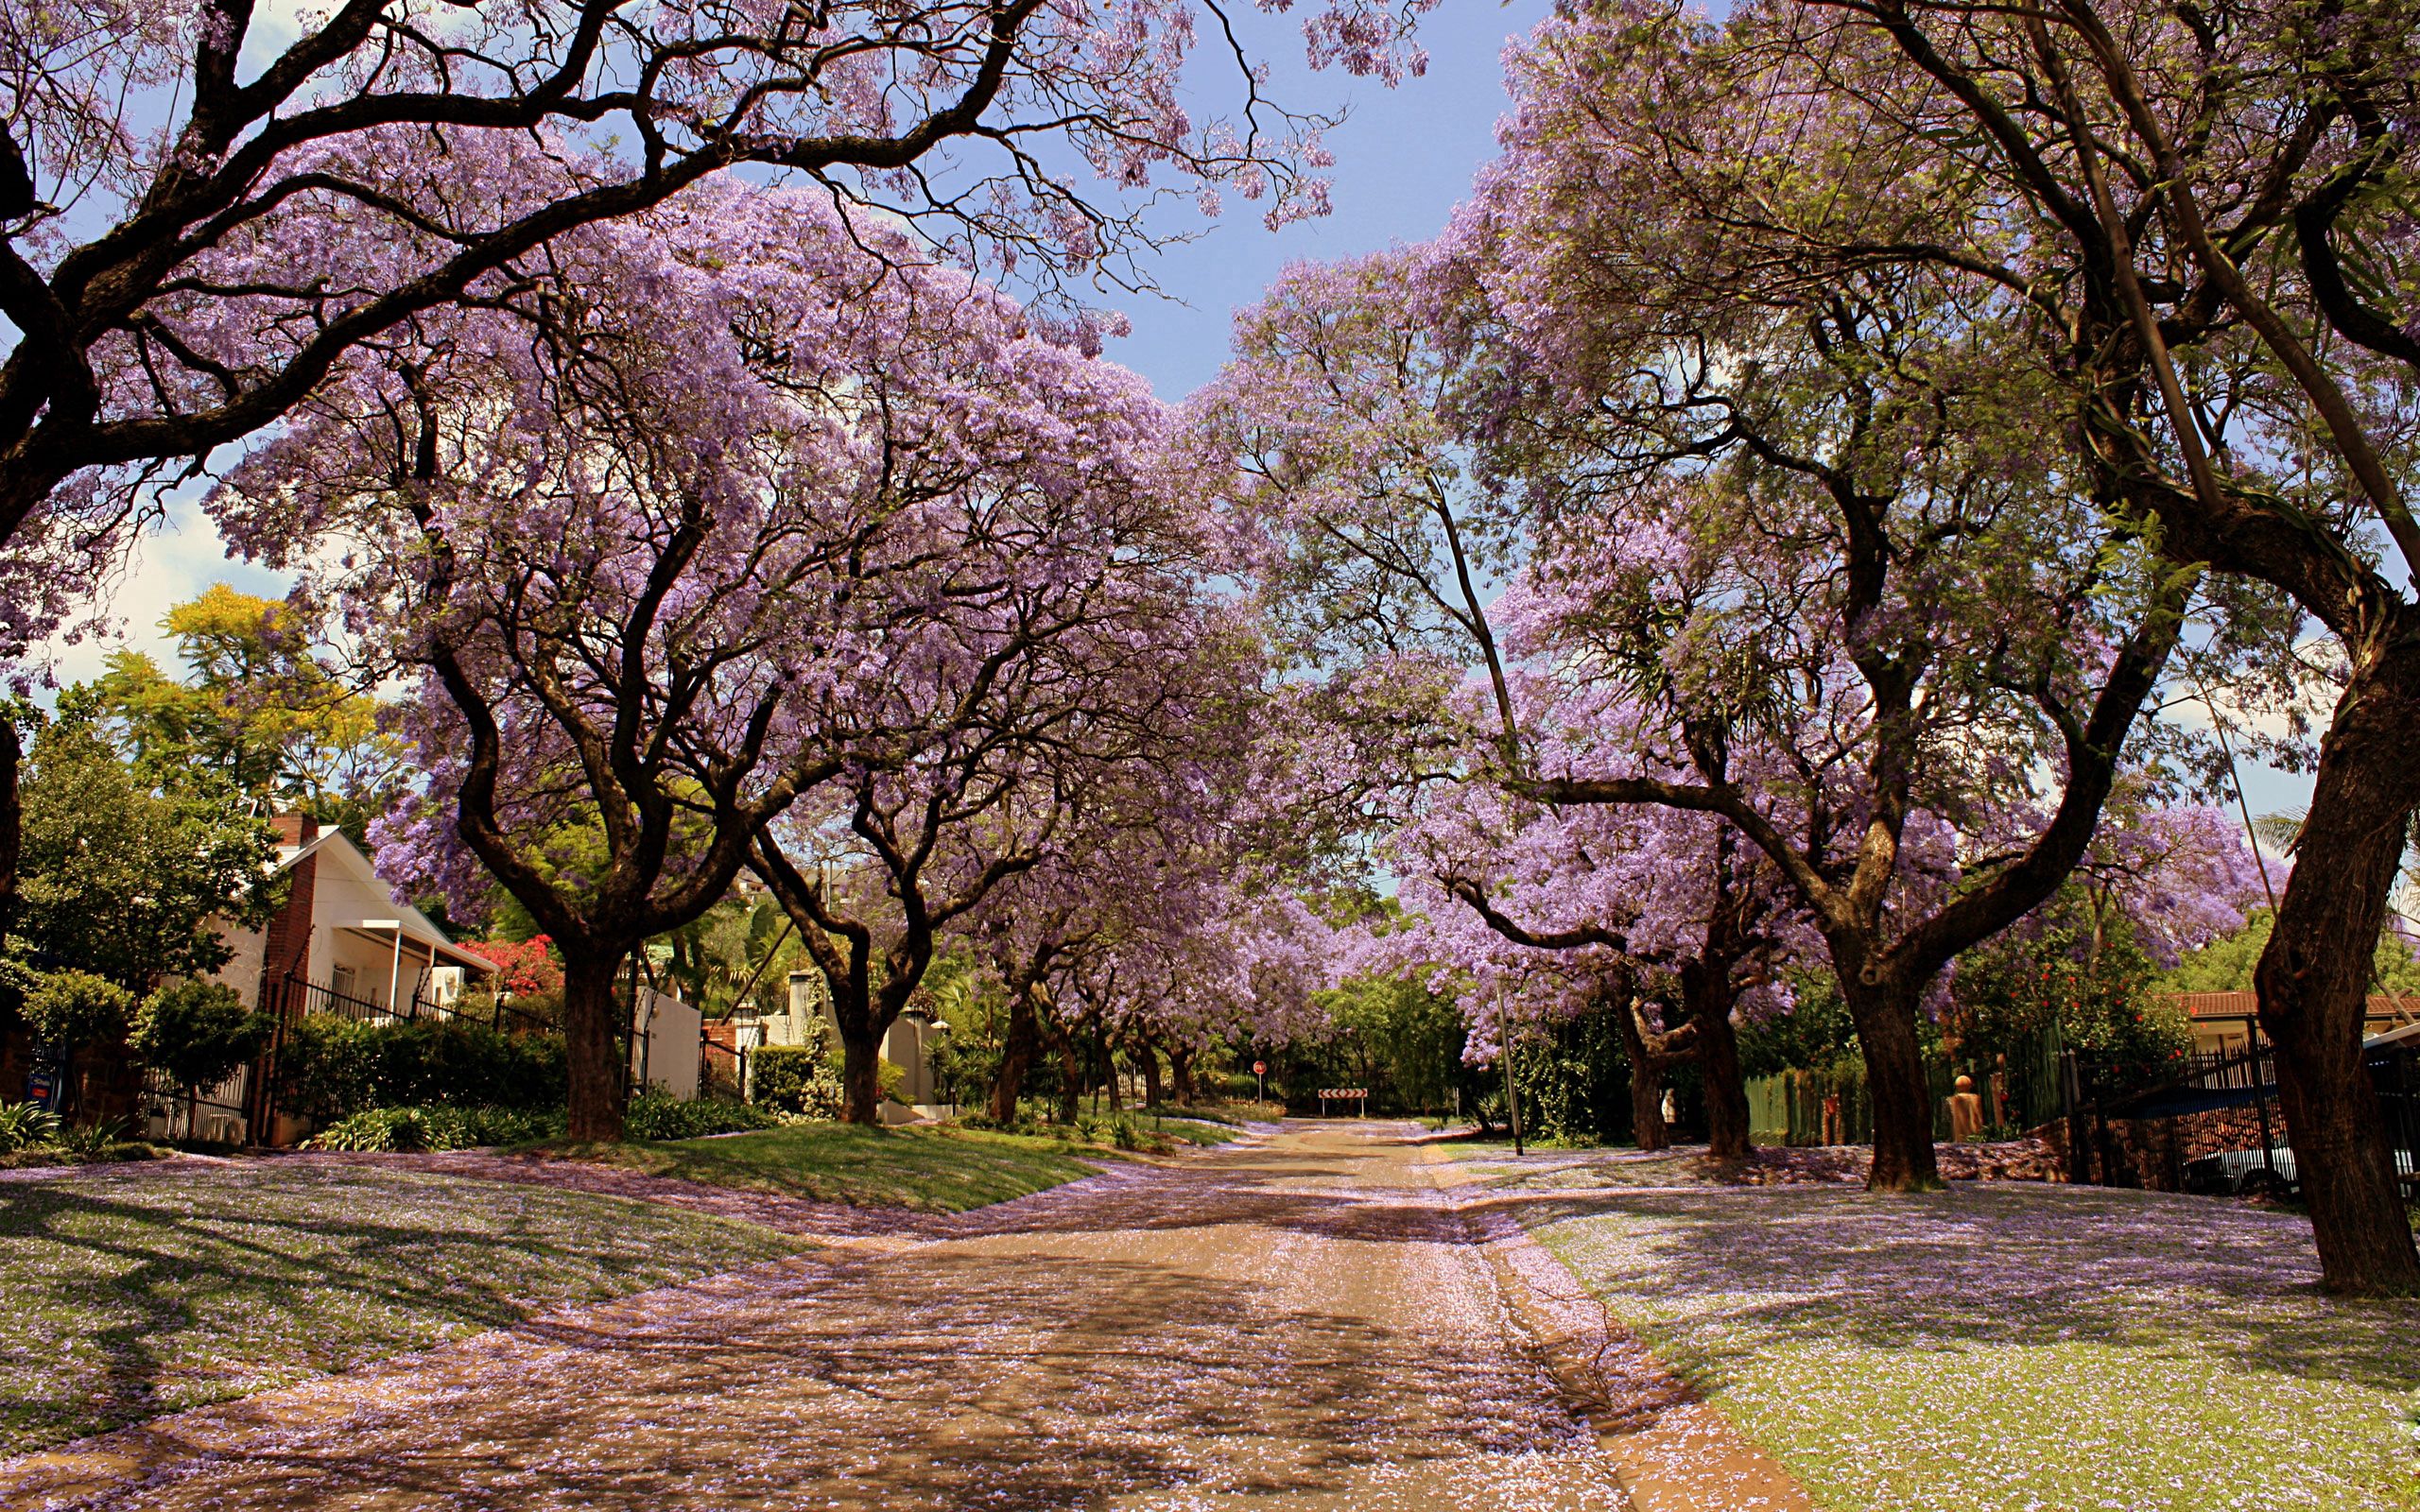 it's beautiful, nature, flowers, trees, park, spring, handsomely